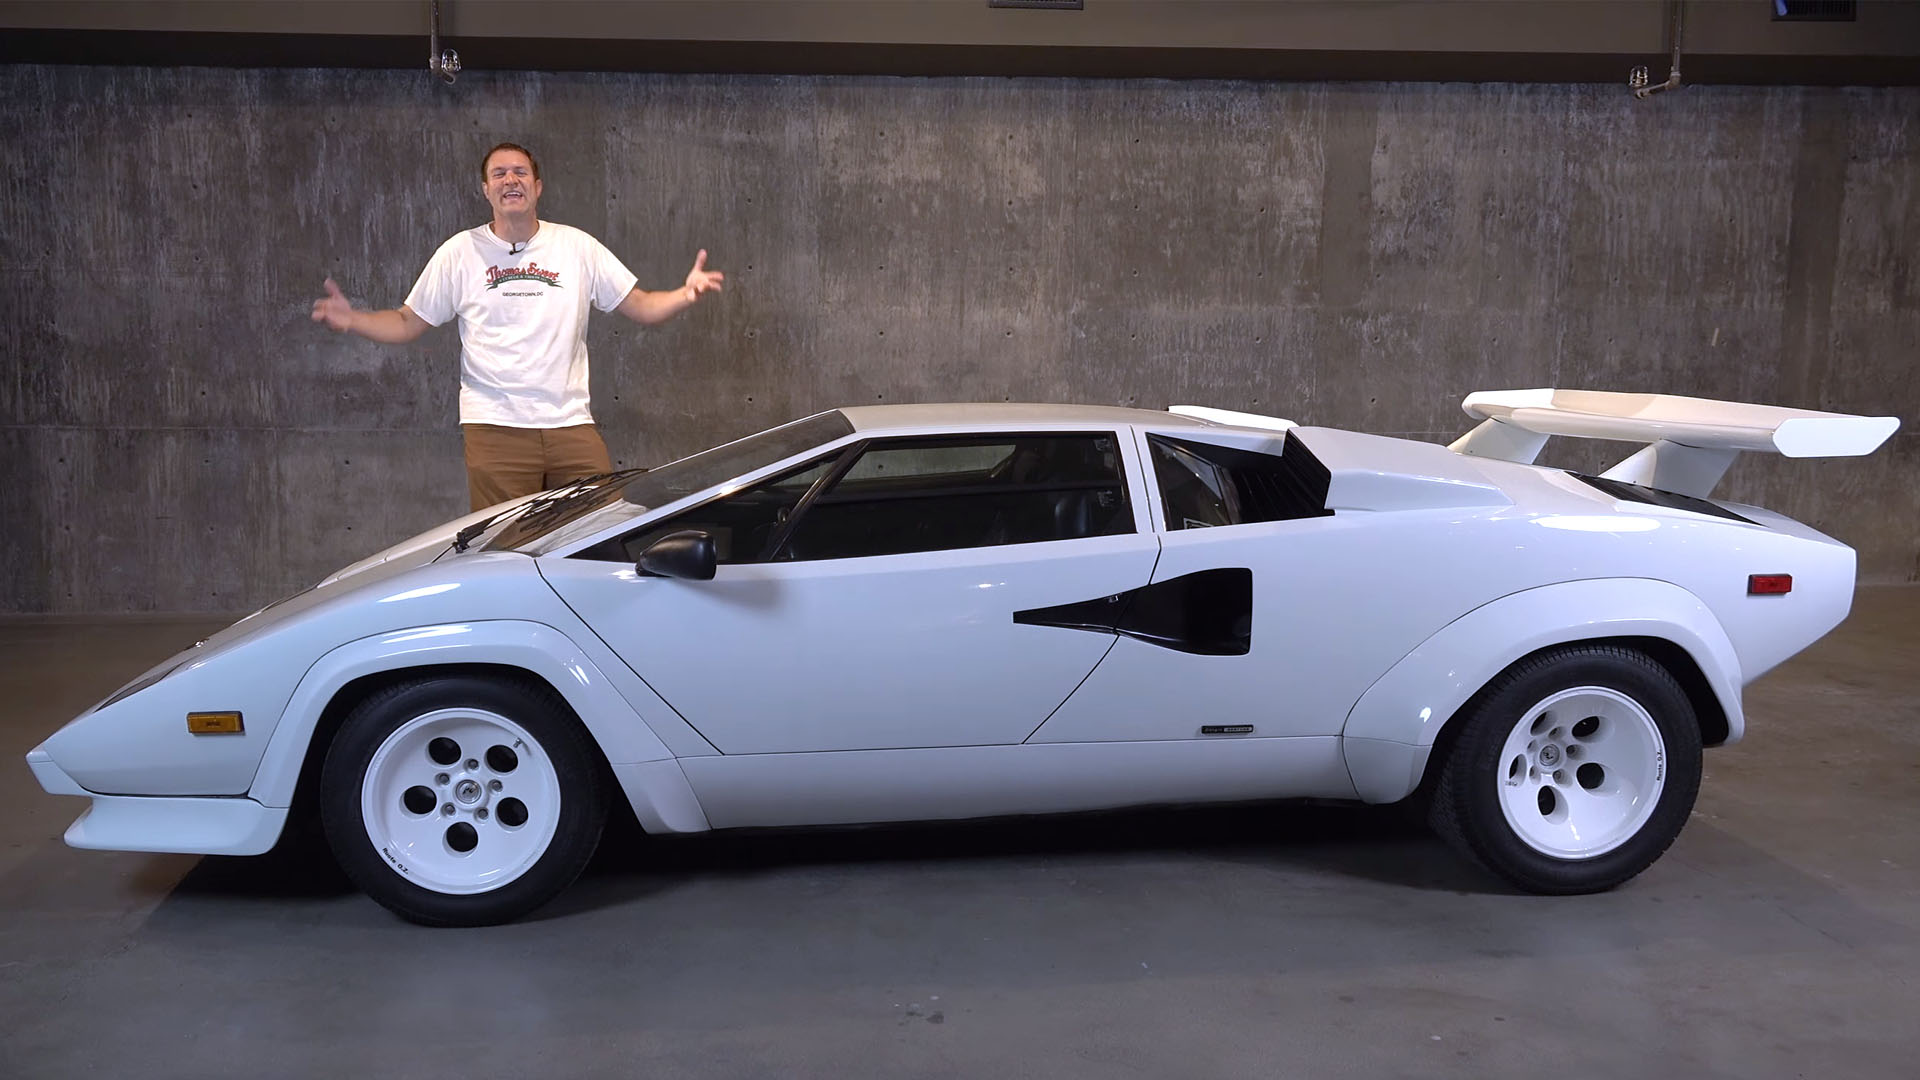 It might be a perfect time to buy a Lamborghini Countach